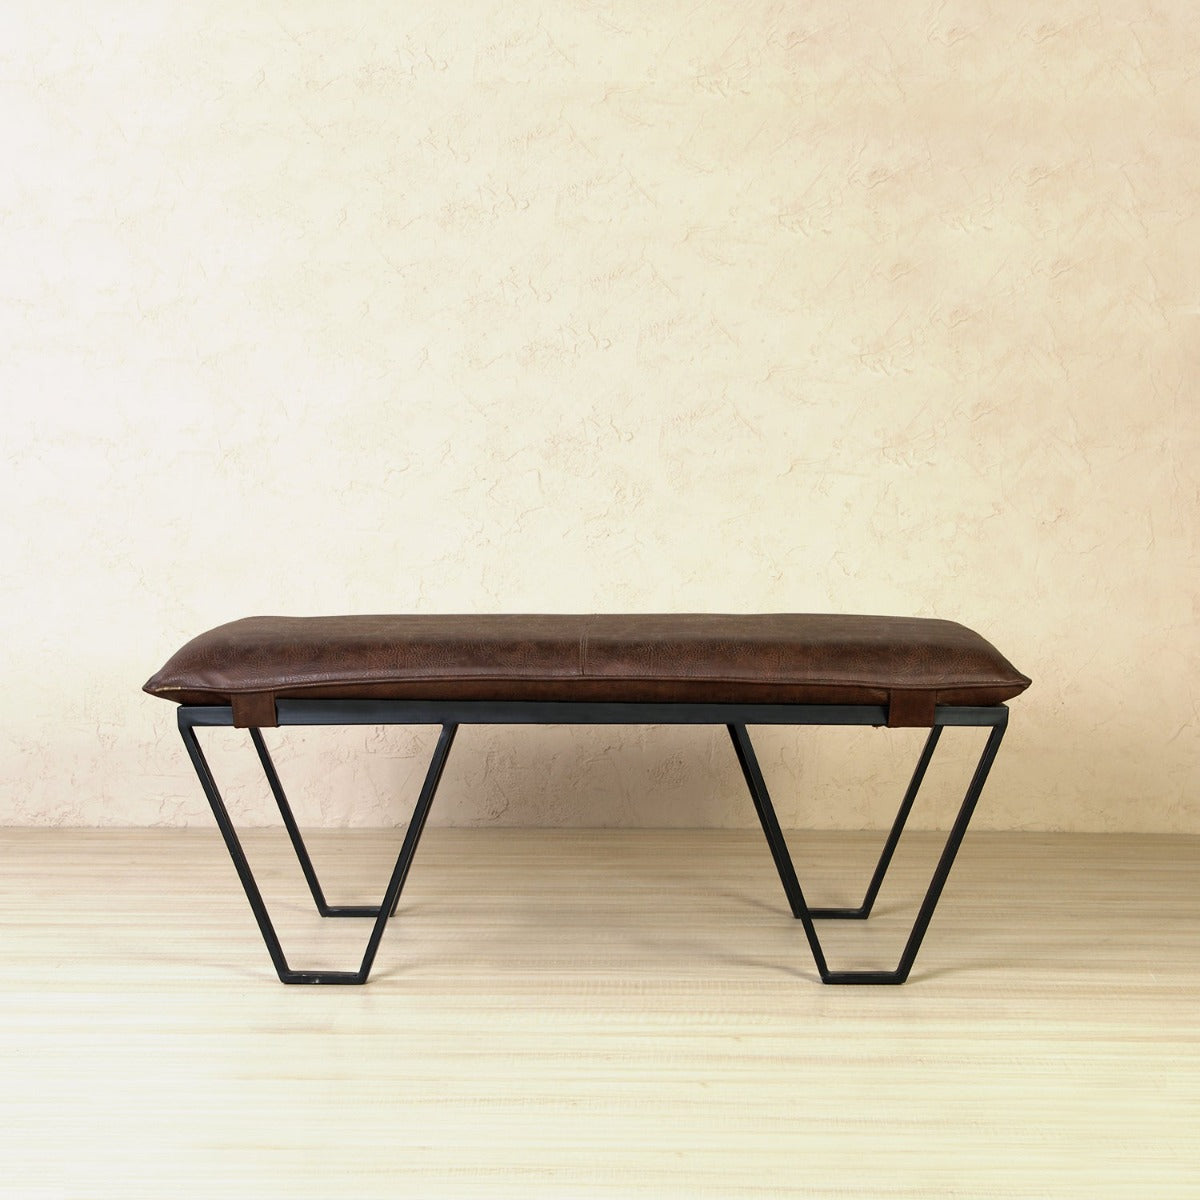 Cassel Accent Leather Bench In Black Finish